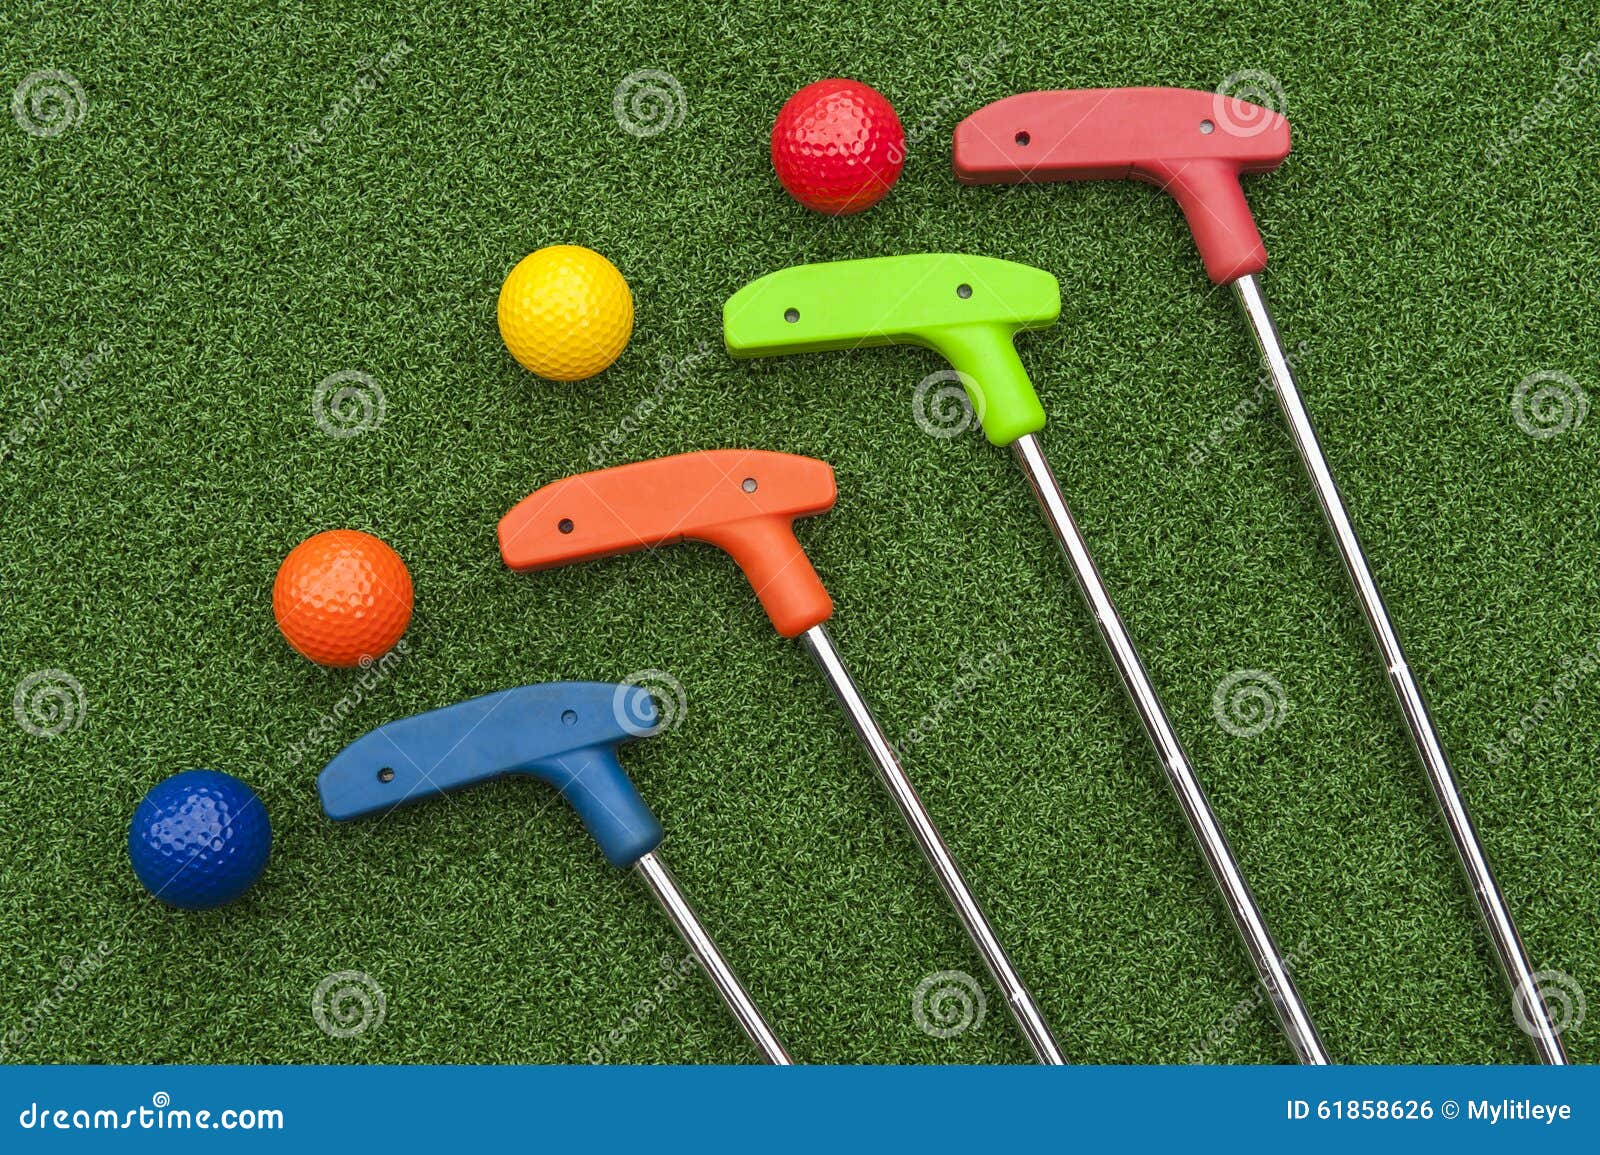 four mini golf putters and balls